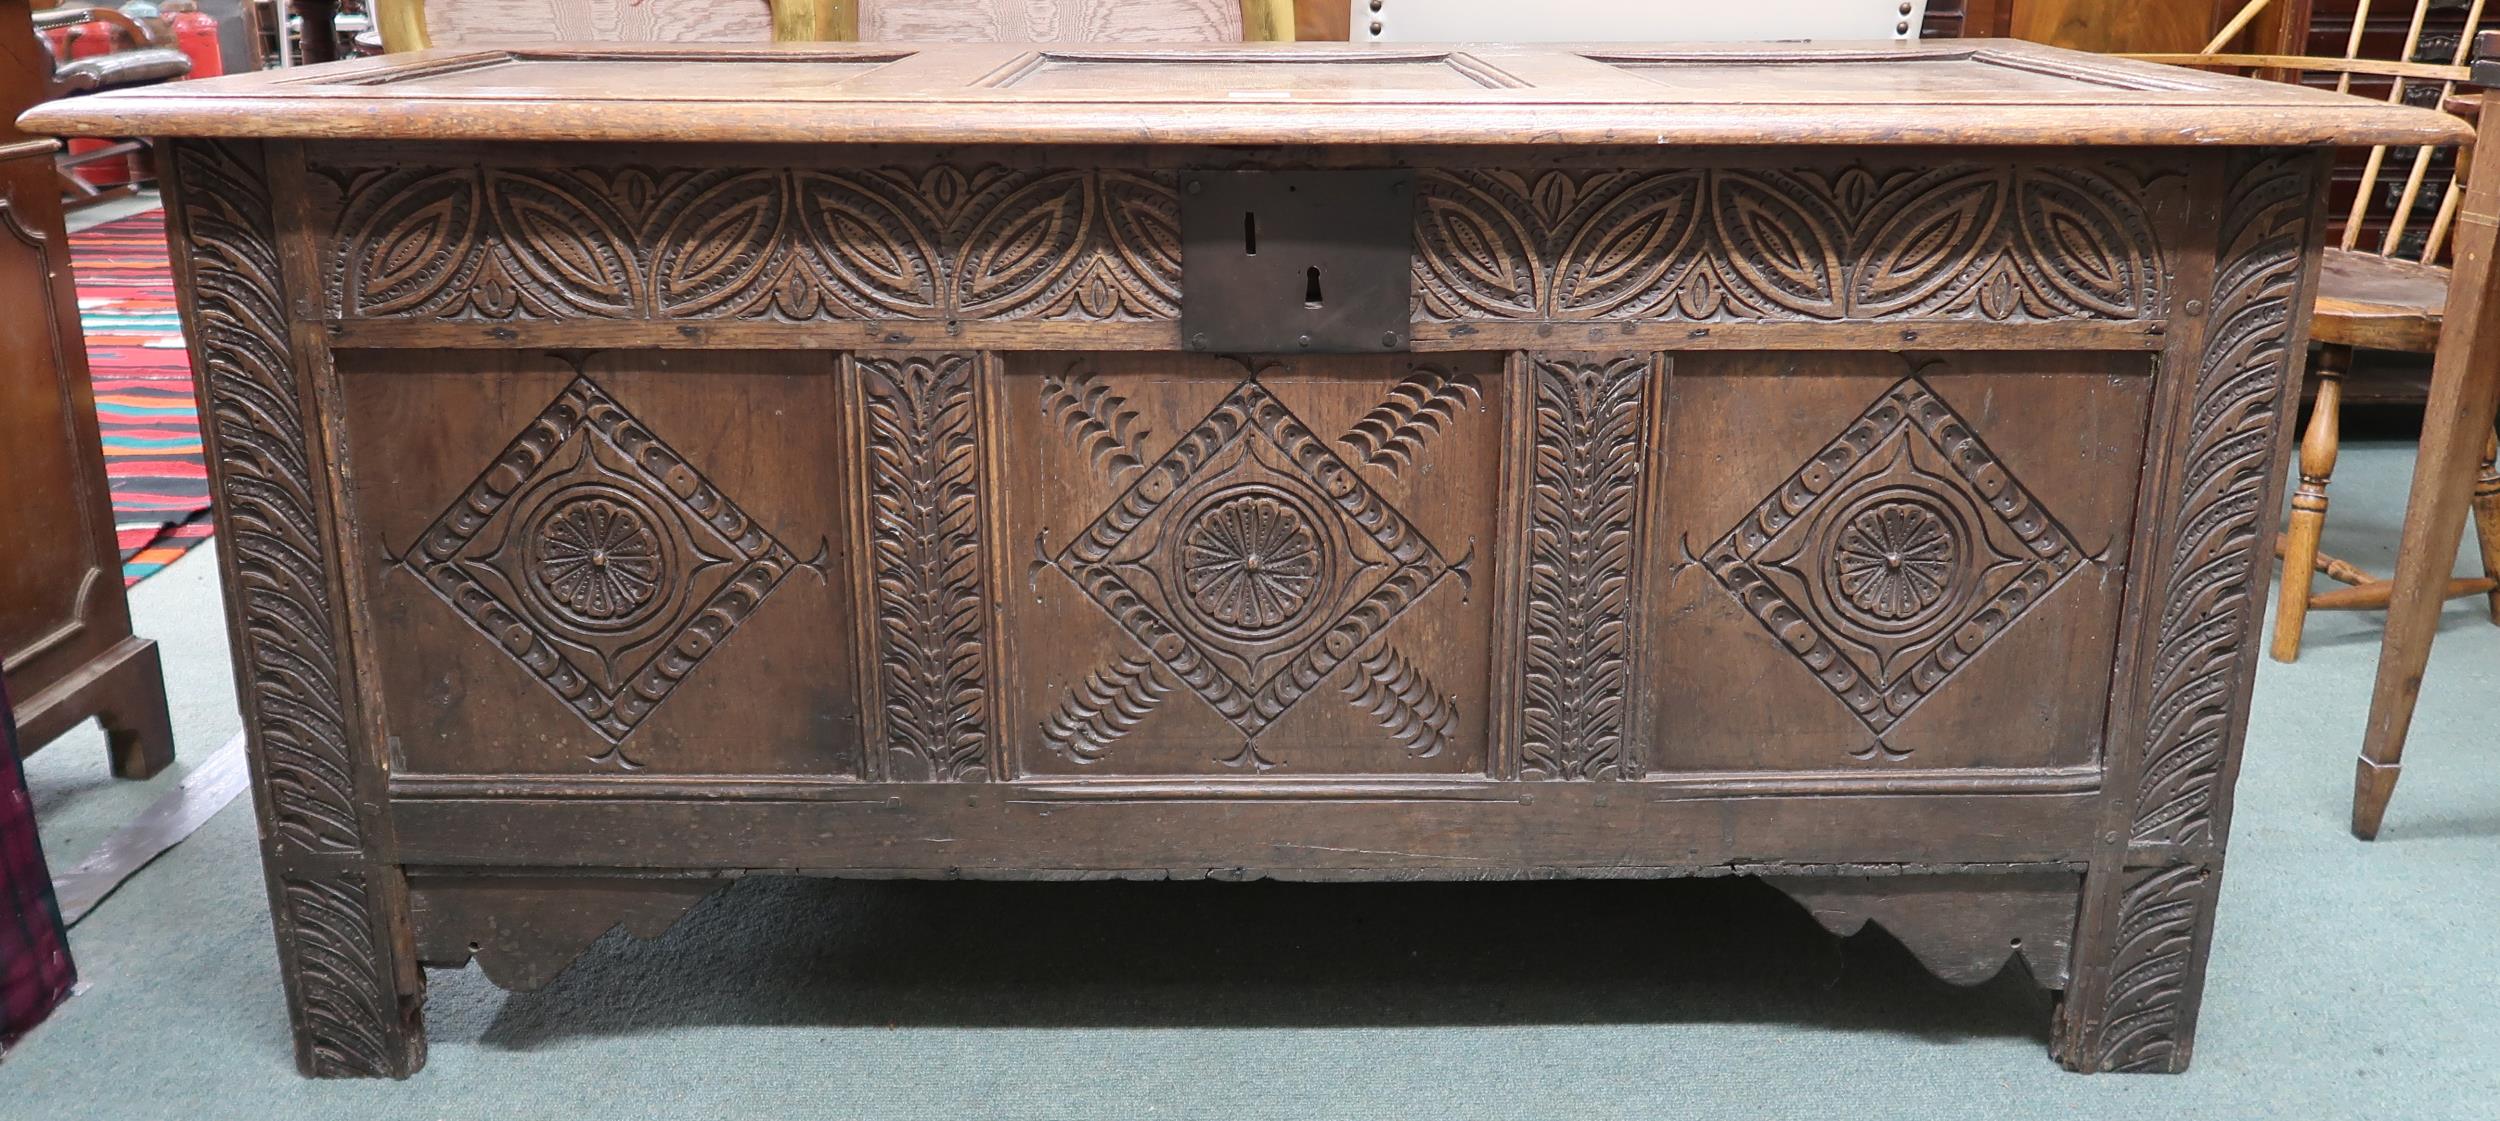 An 18th century oak blanket chest with carved panel front, 71cm high x 151cm wide x 63cm deep